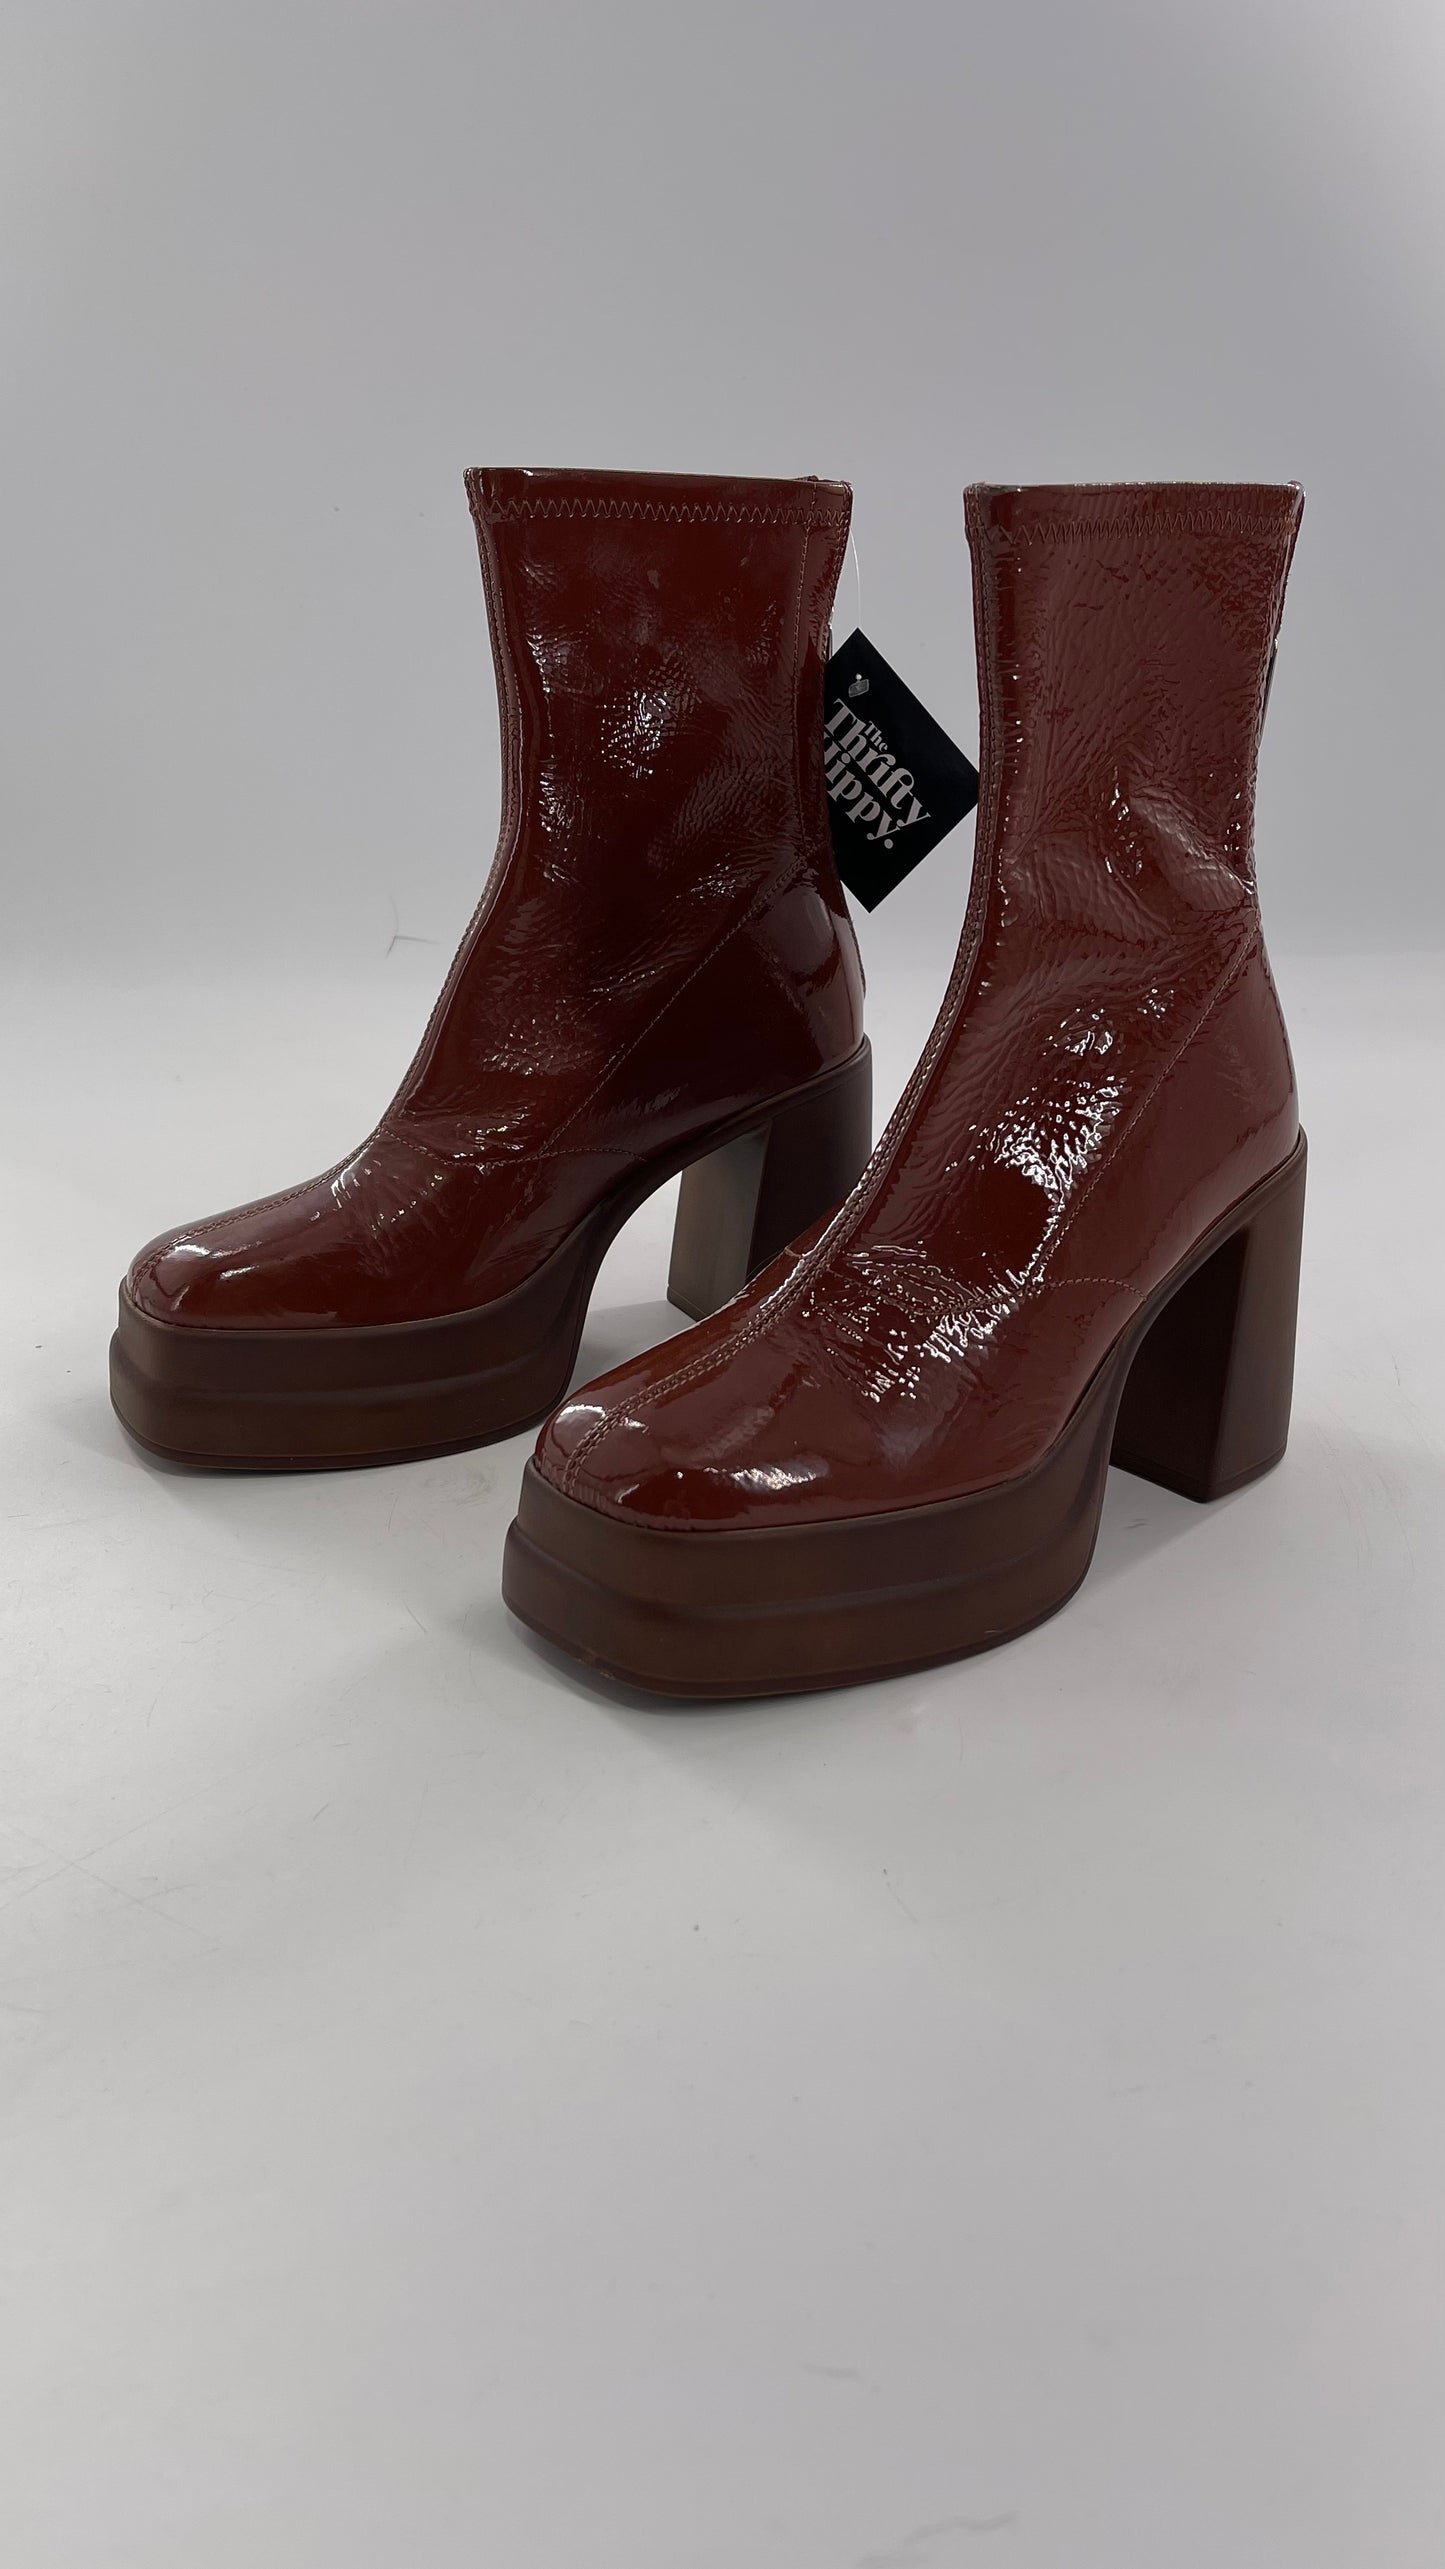 Free People Double StackedGlossy Patent Chestnut Brown Platform Boots with Chunky Heels (37.5)